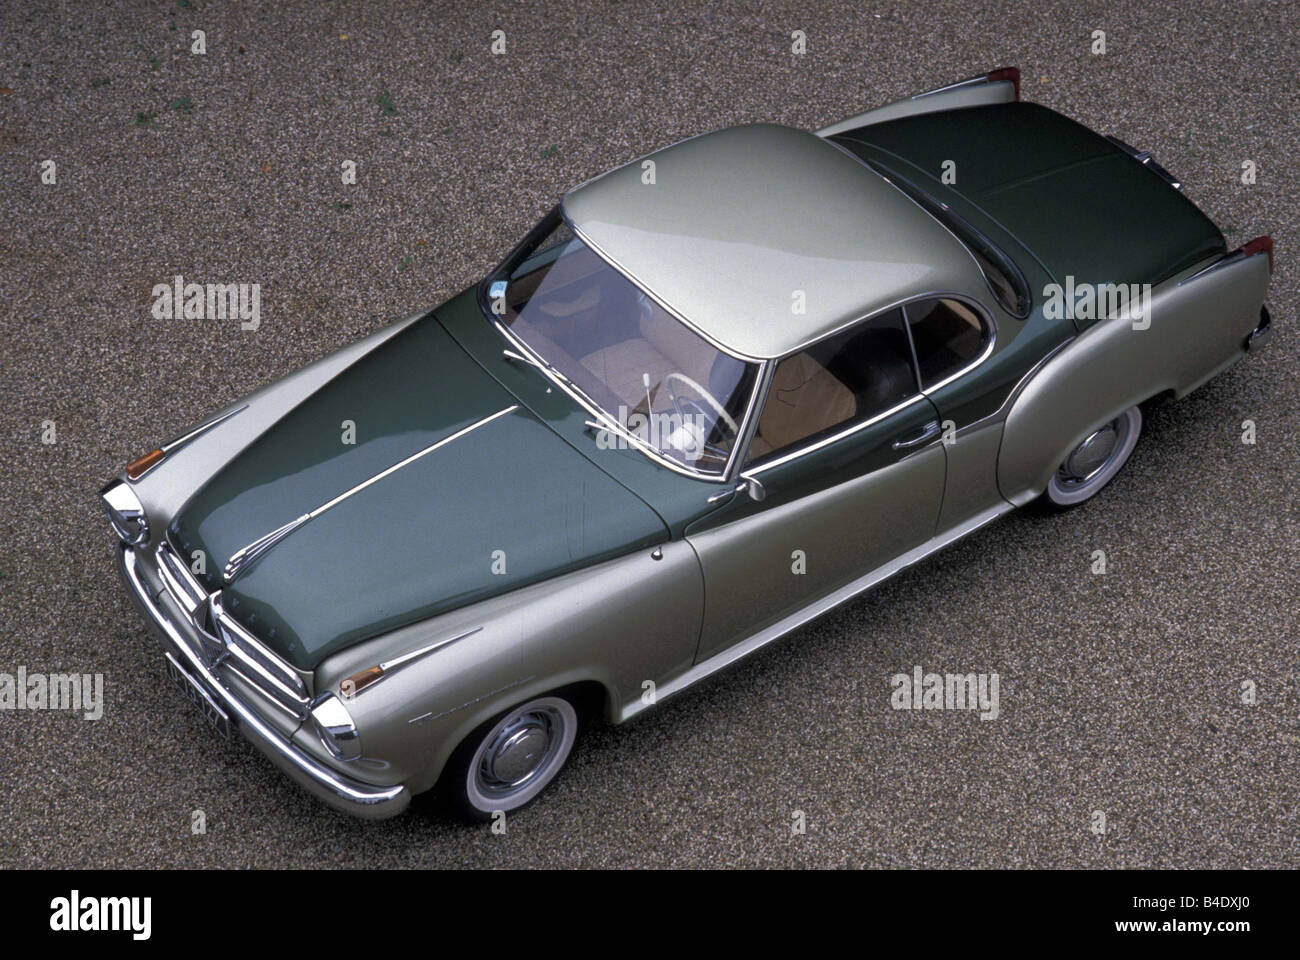 Car, Borgward Isabella Coupe/coupe, Vintage approx., model year 1958, silver-black, 1950s, sixties, FGUJ, standing, upholding, d Stock Photo